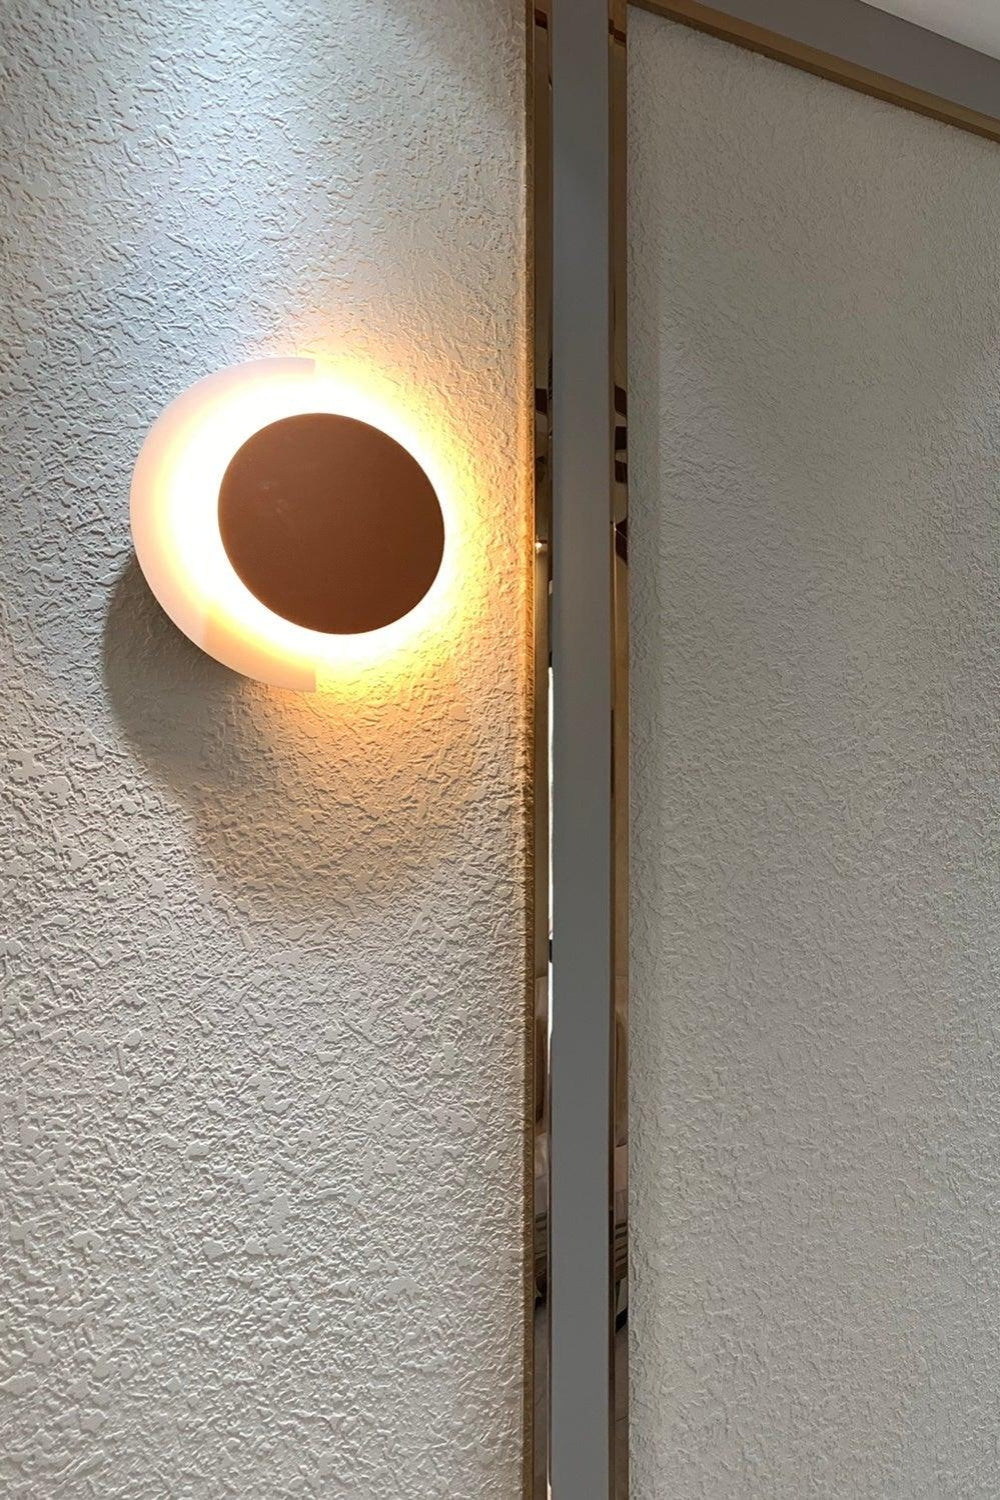 Rounded Abstract Art Sconce